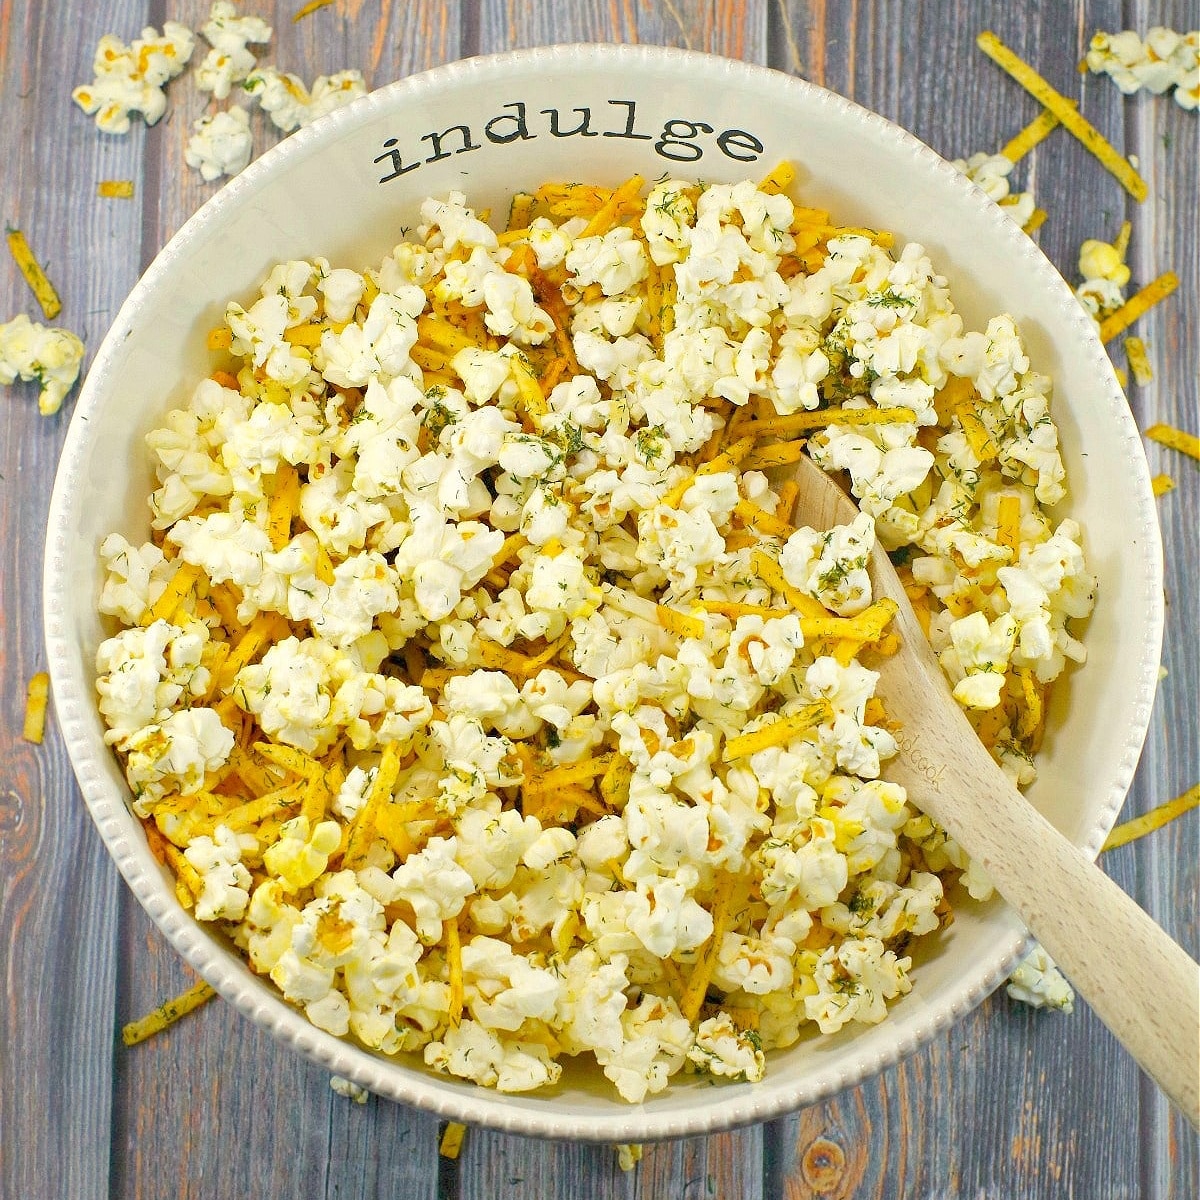 You'll Never Buy Microwave Popcorn Again Thanks to This - The Mom Creative